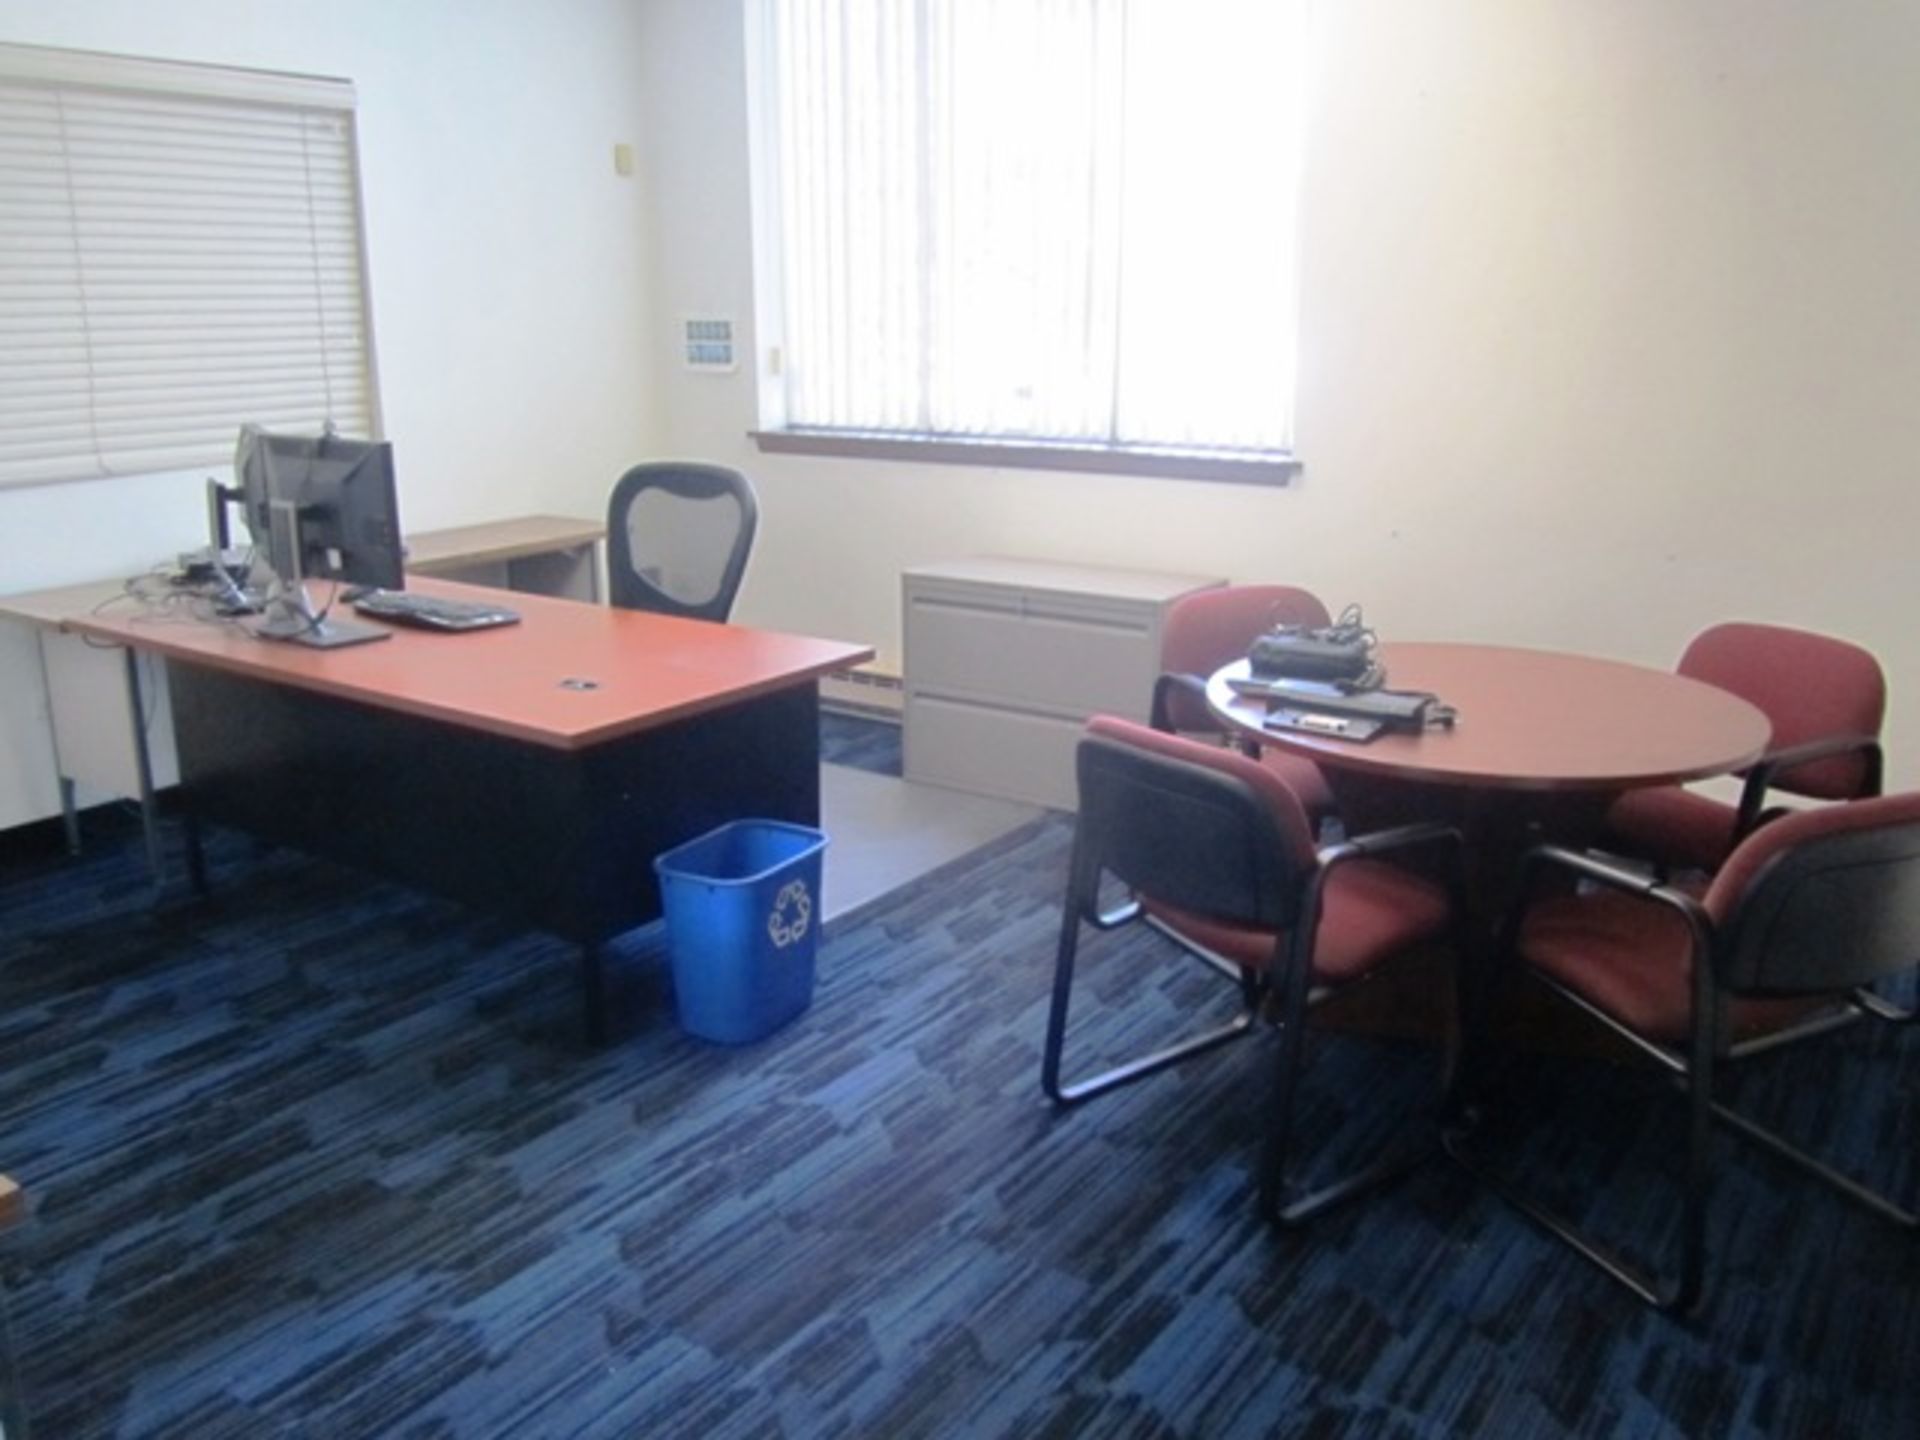 Contents of Office consisting of Desk, Chair, Round Table with Chairs (no computer)